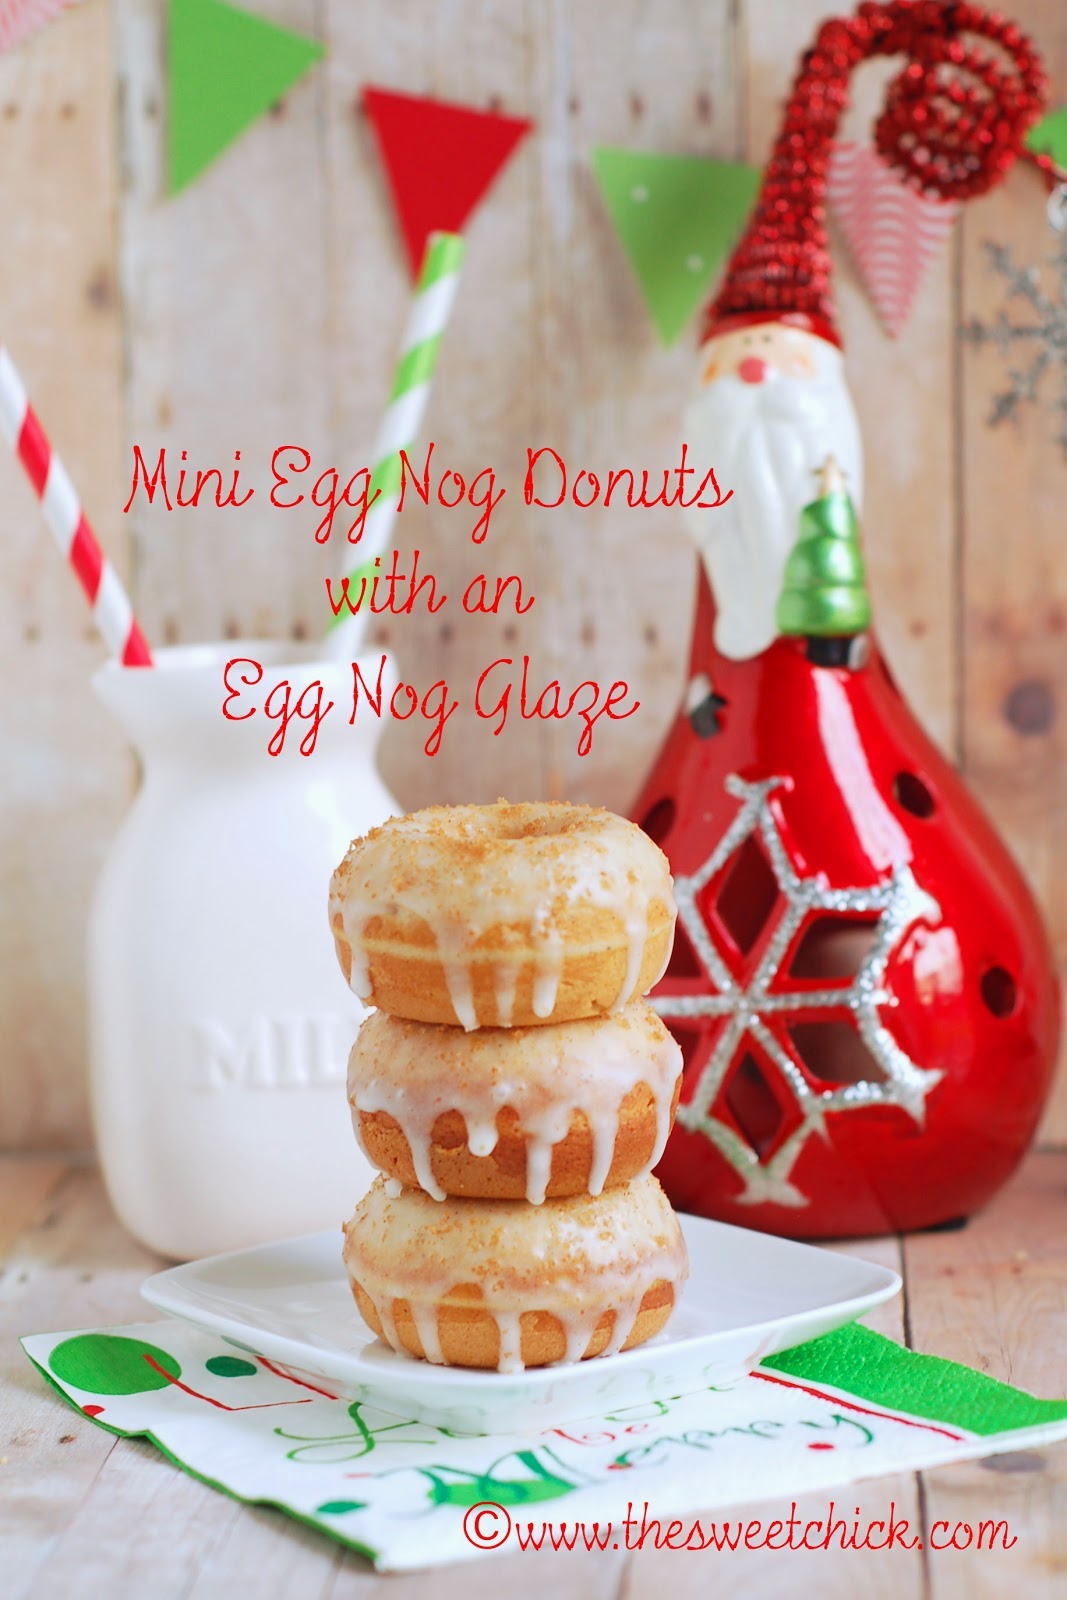 http://www.thesweetchick.com/2012/12/mini-cinnamon-egg-nog-donuts-with-egg.html